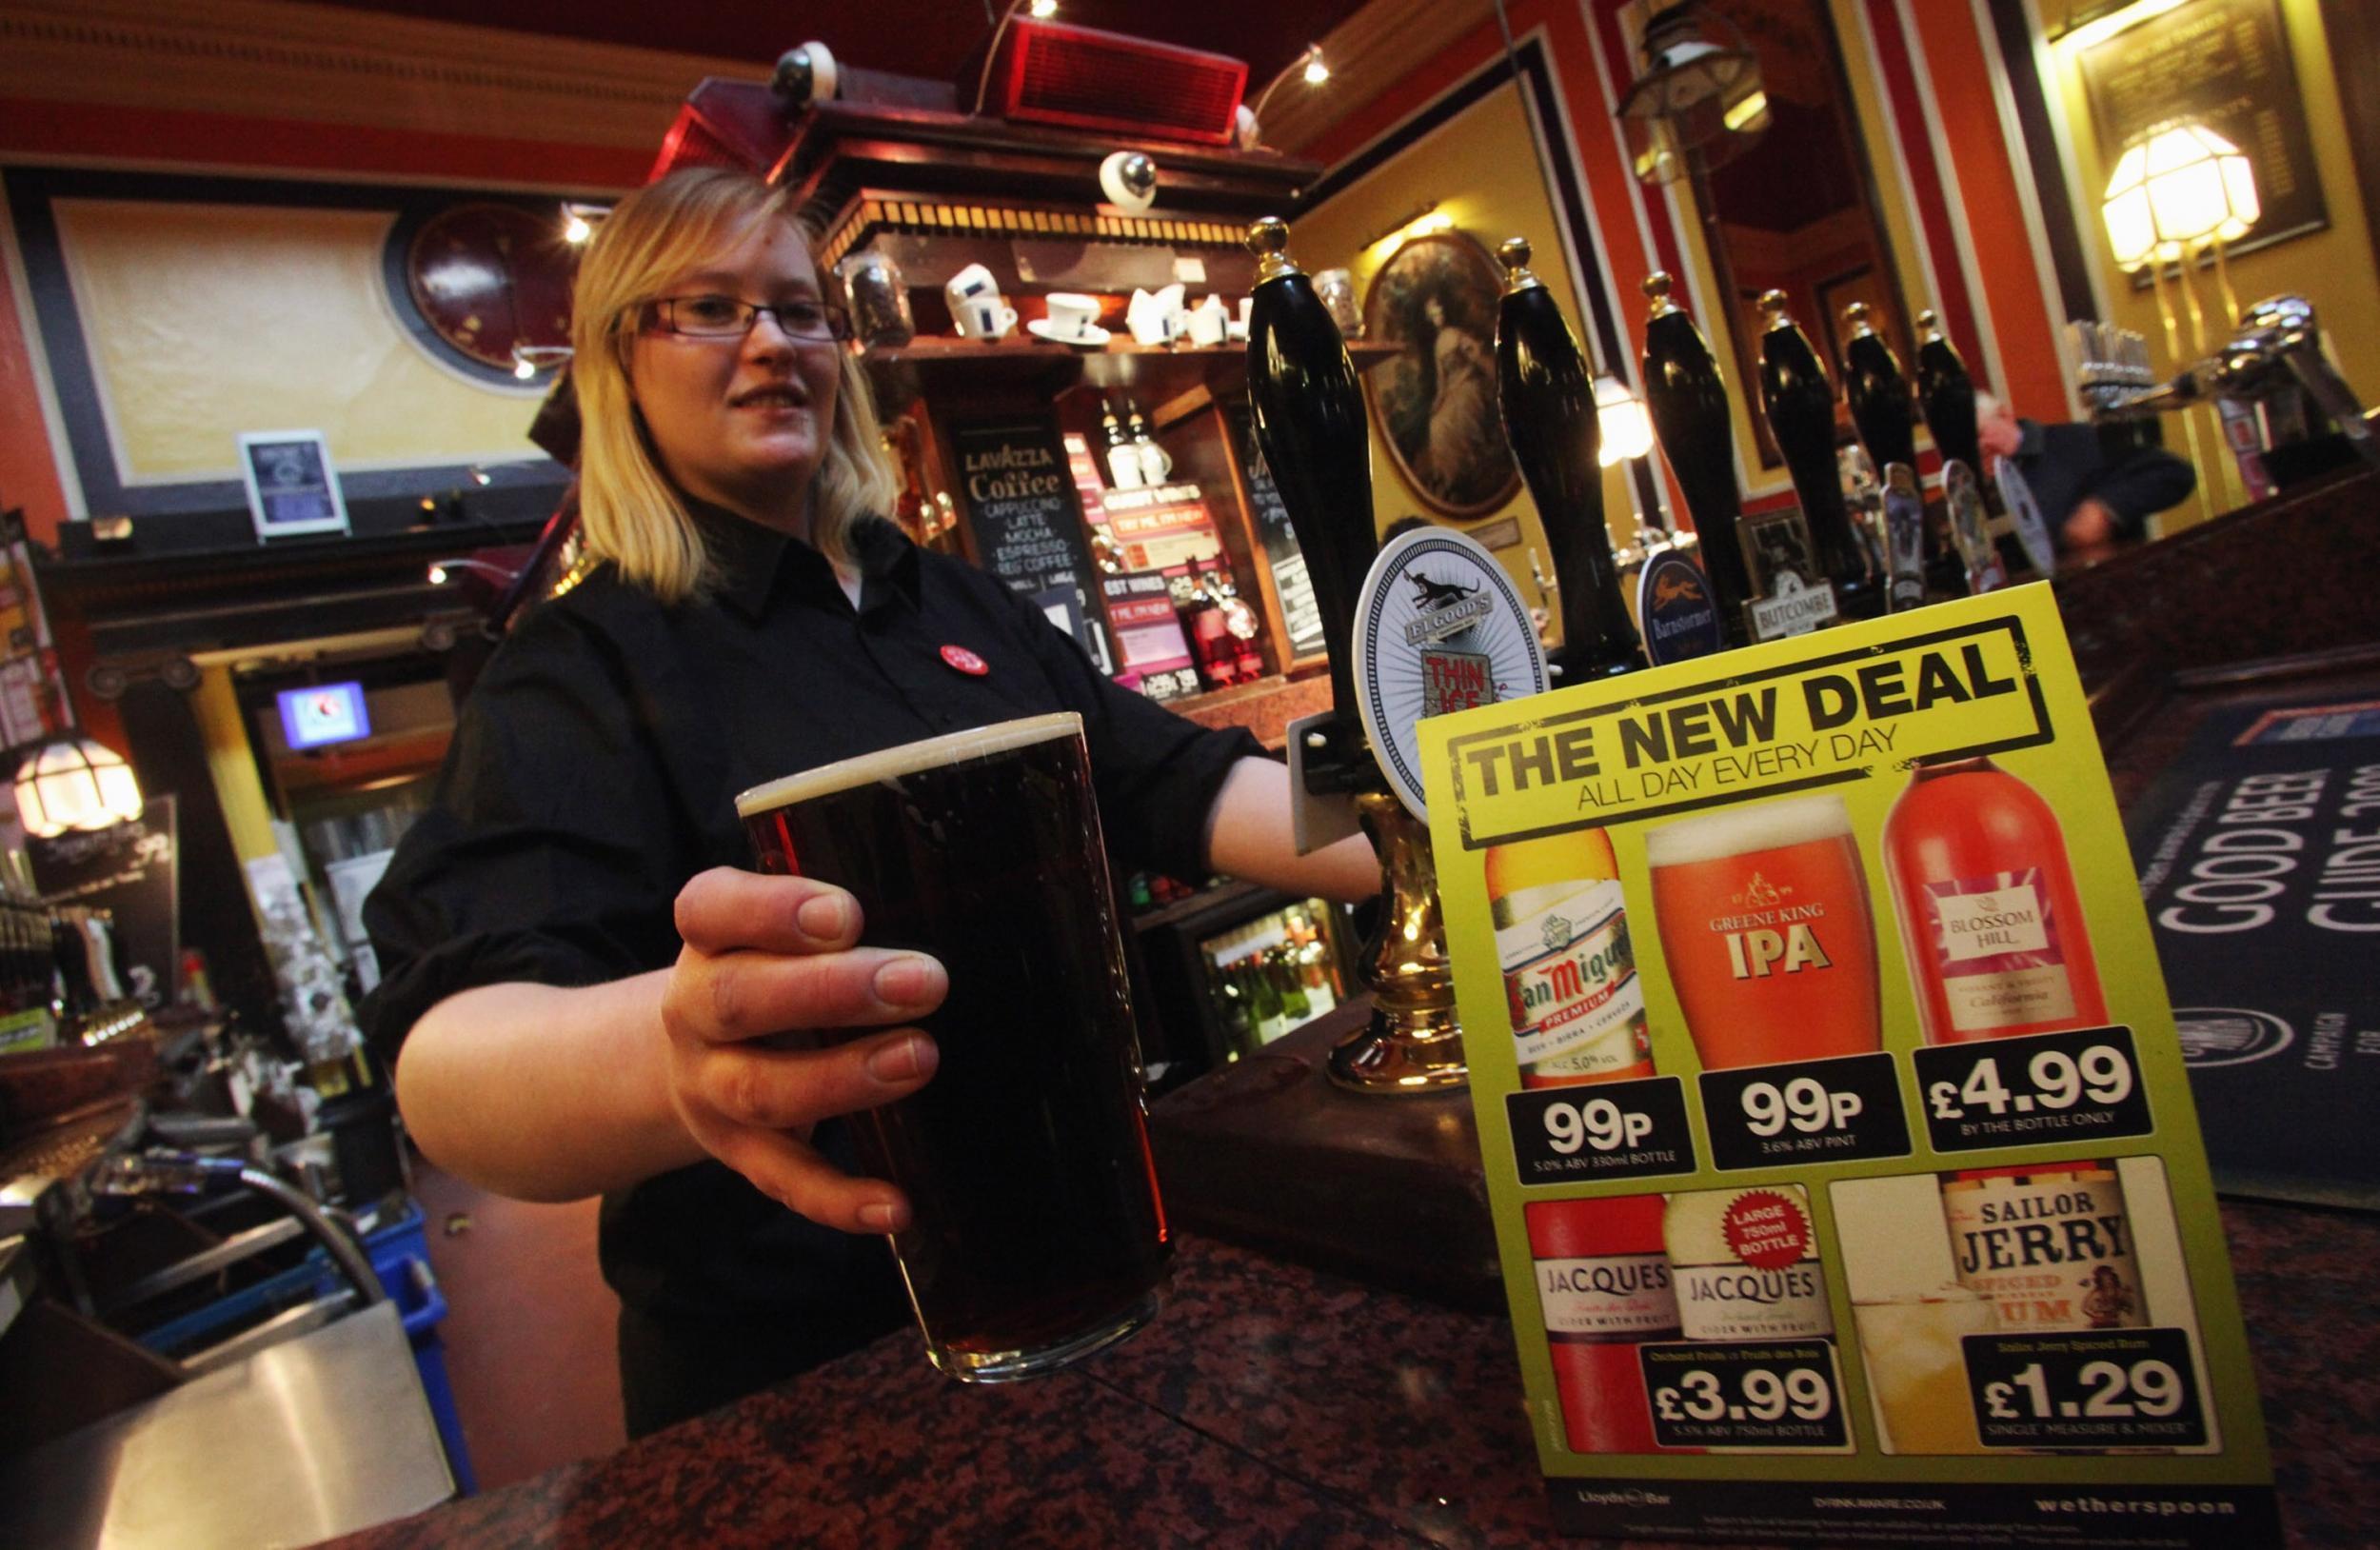 Wetherspoon, which opened two new pubs since the start of the financial year and sold six, said on Wednesday that it intends to open between 10 and 15 pubs in the current financial year